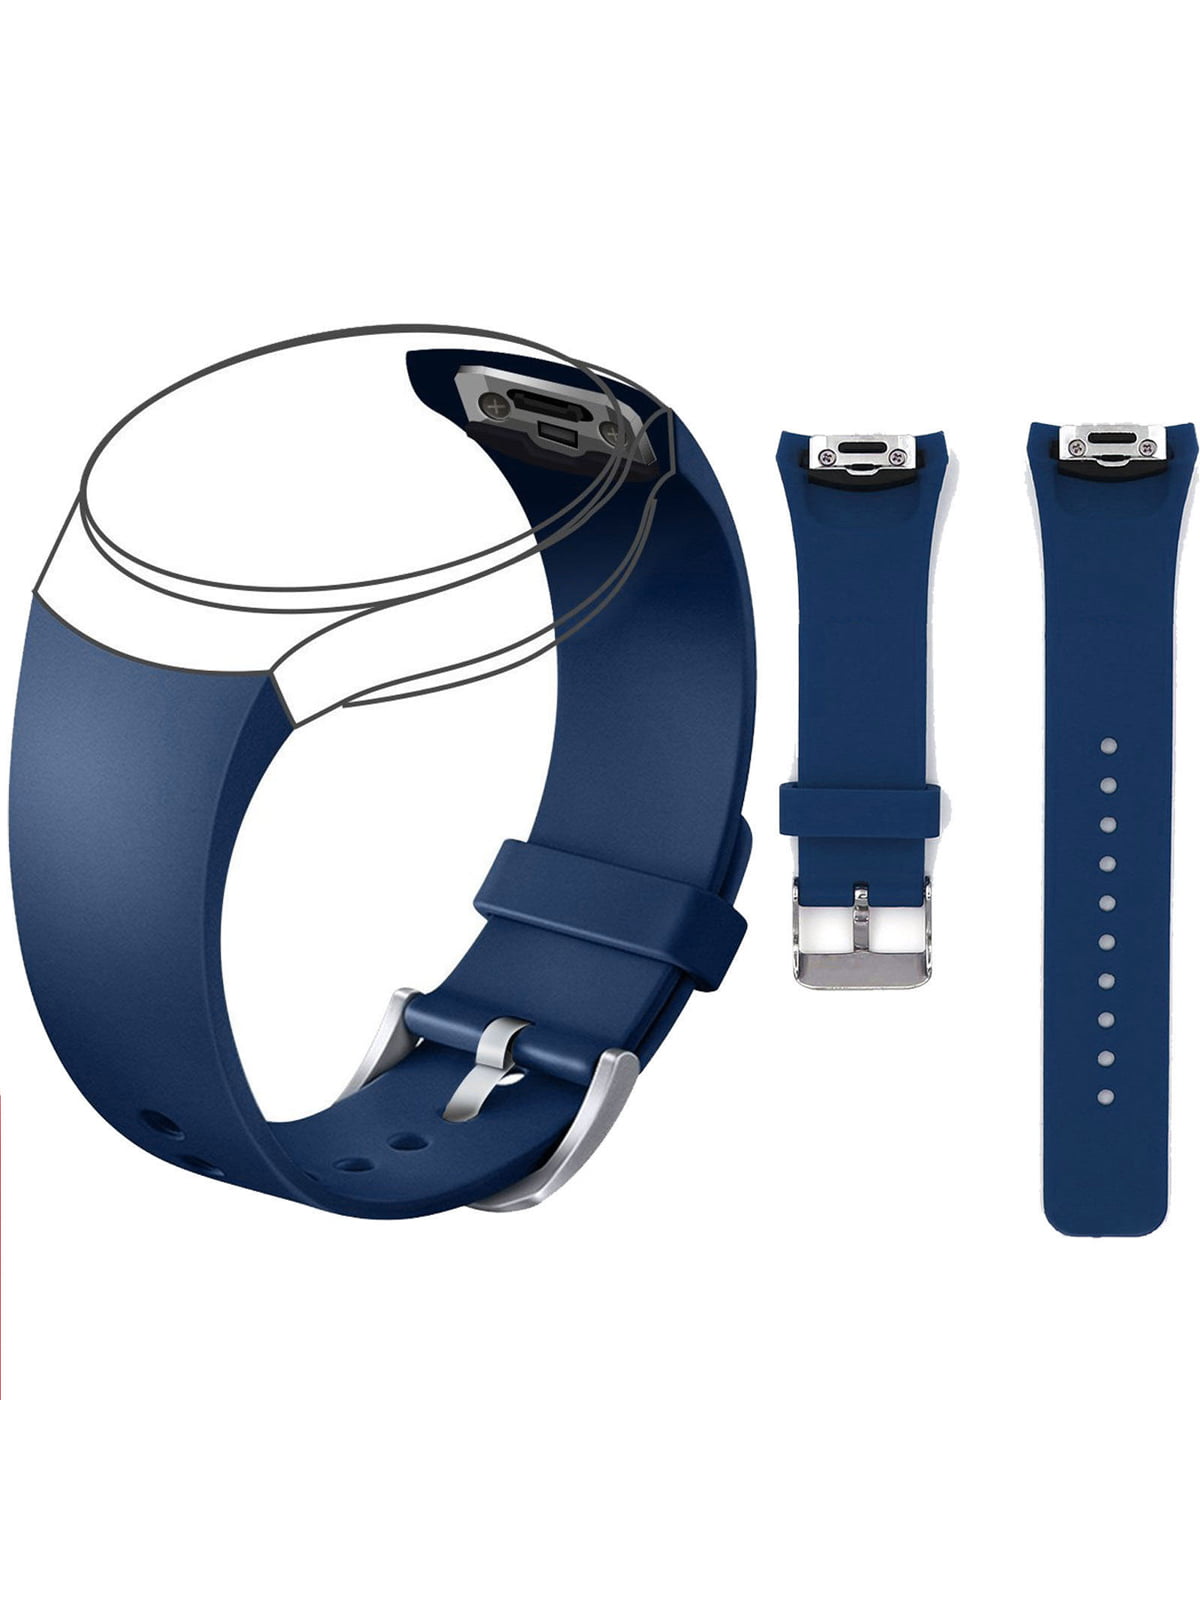 s2 watch bands